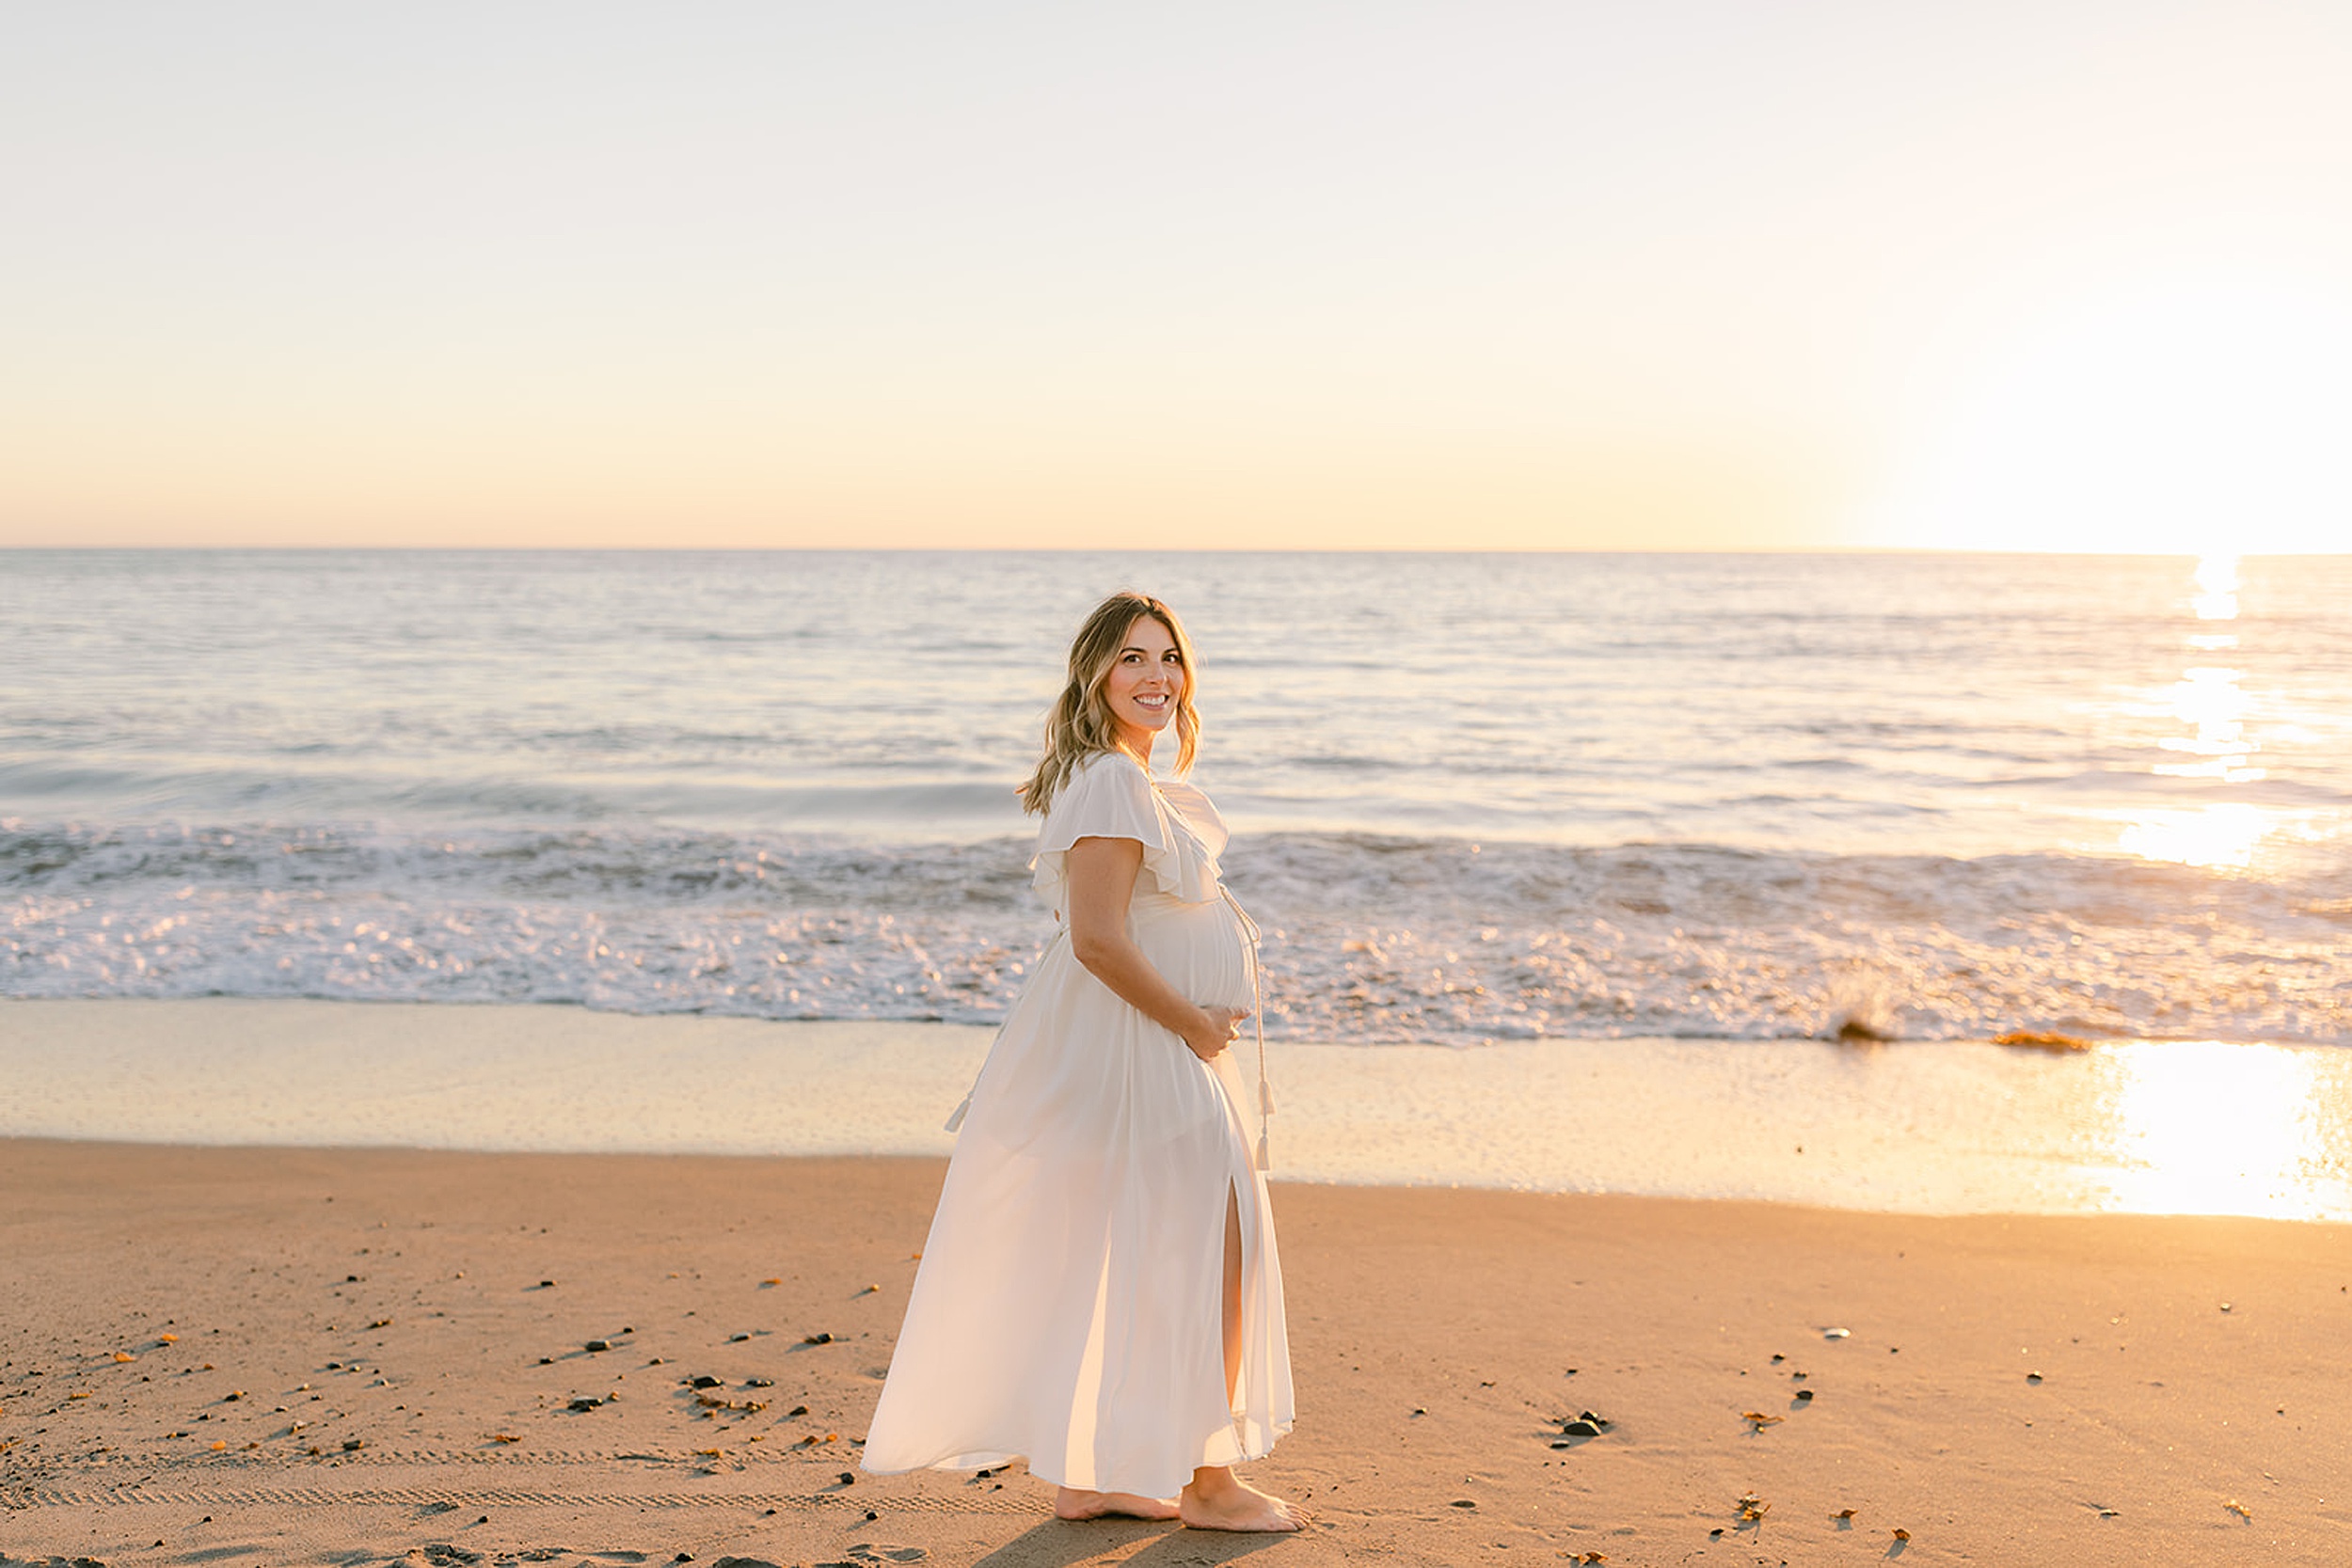 A mother to be in a white maternity gown stands on a beach at sunset holding her bump